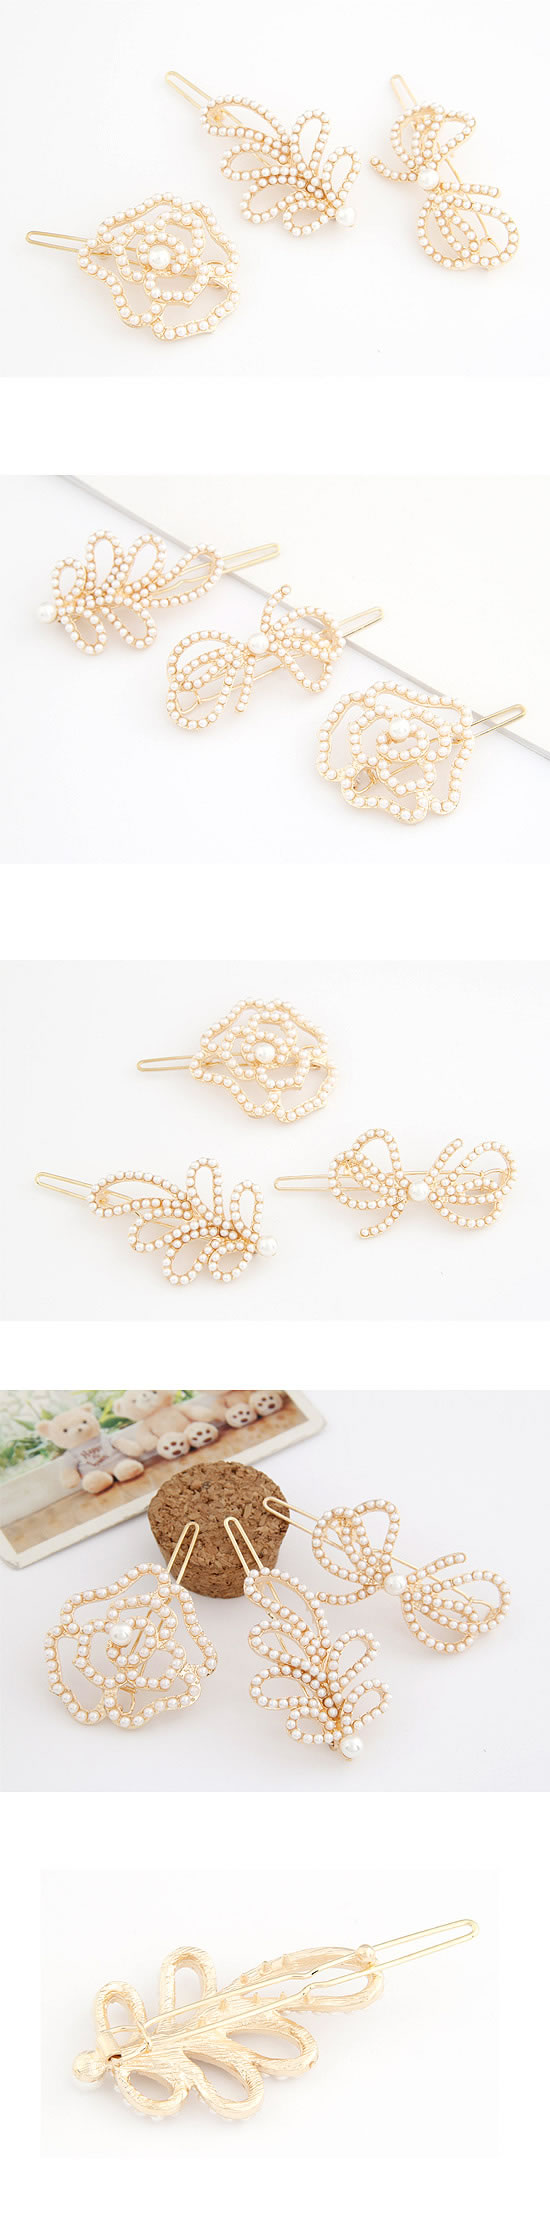 African White Exquisite Sweet Fashion Imitate Pearl Bow Tie Alloy Hair clip hair claw,Hairpins